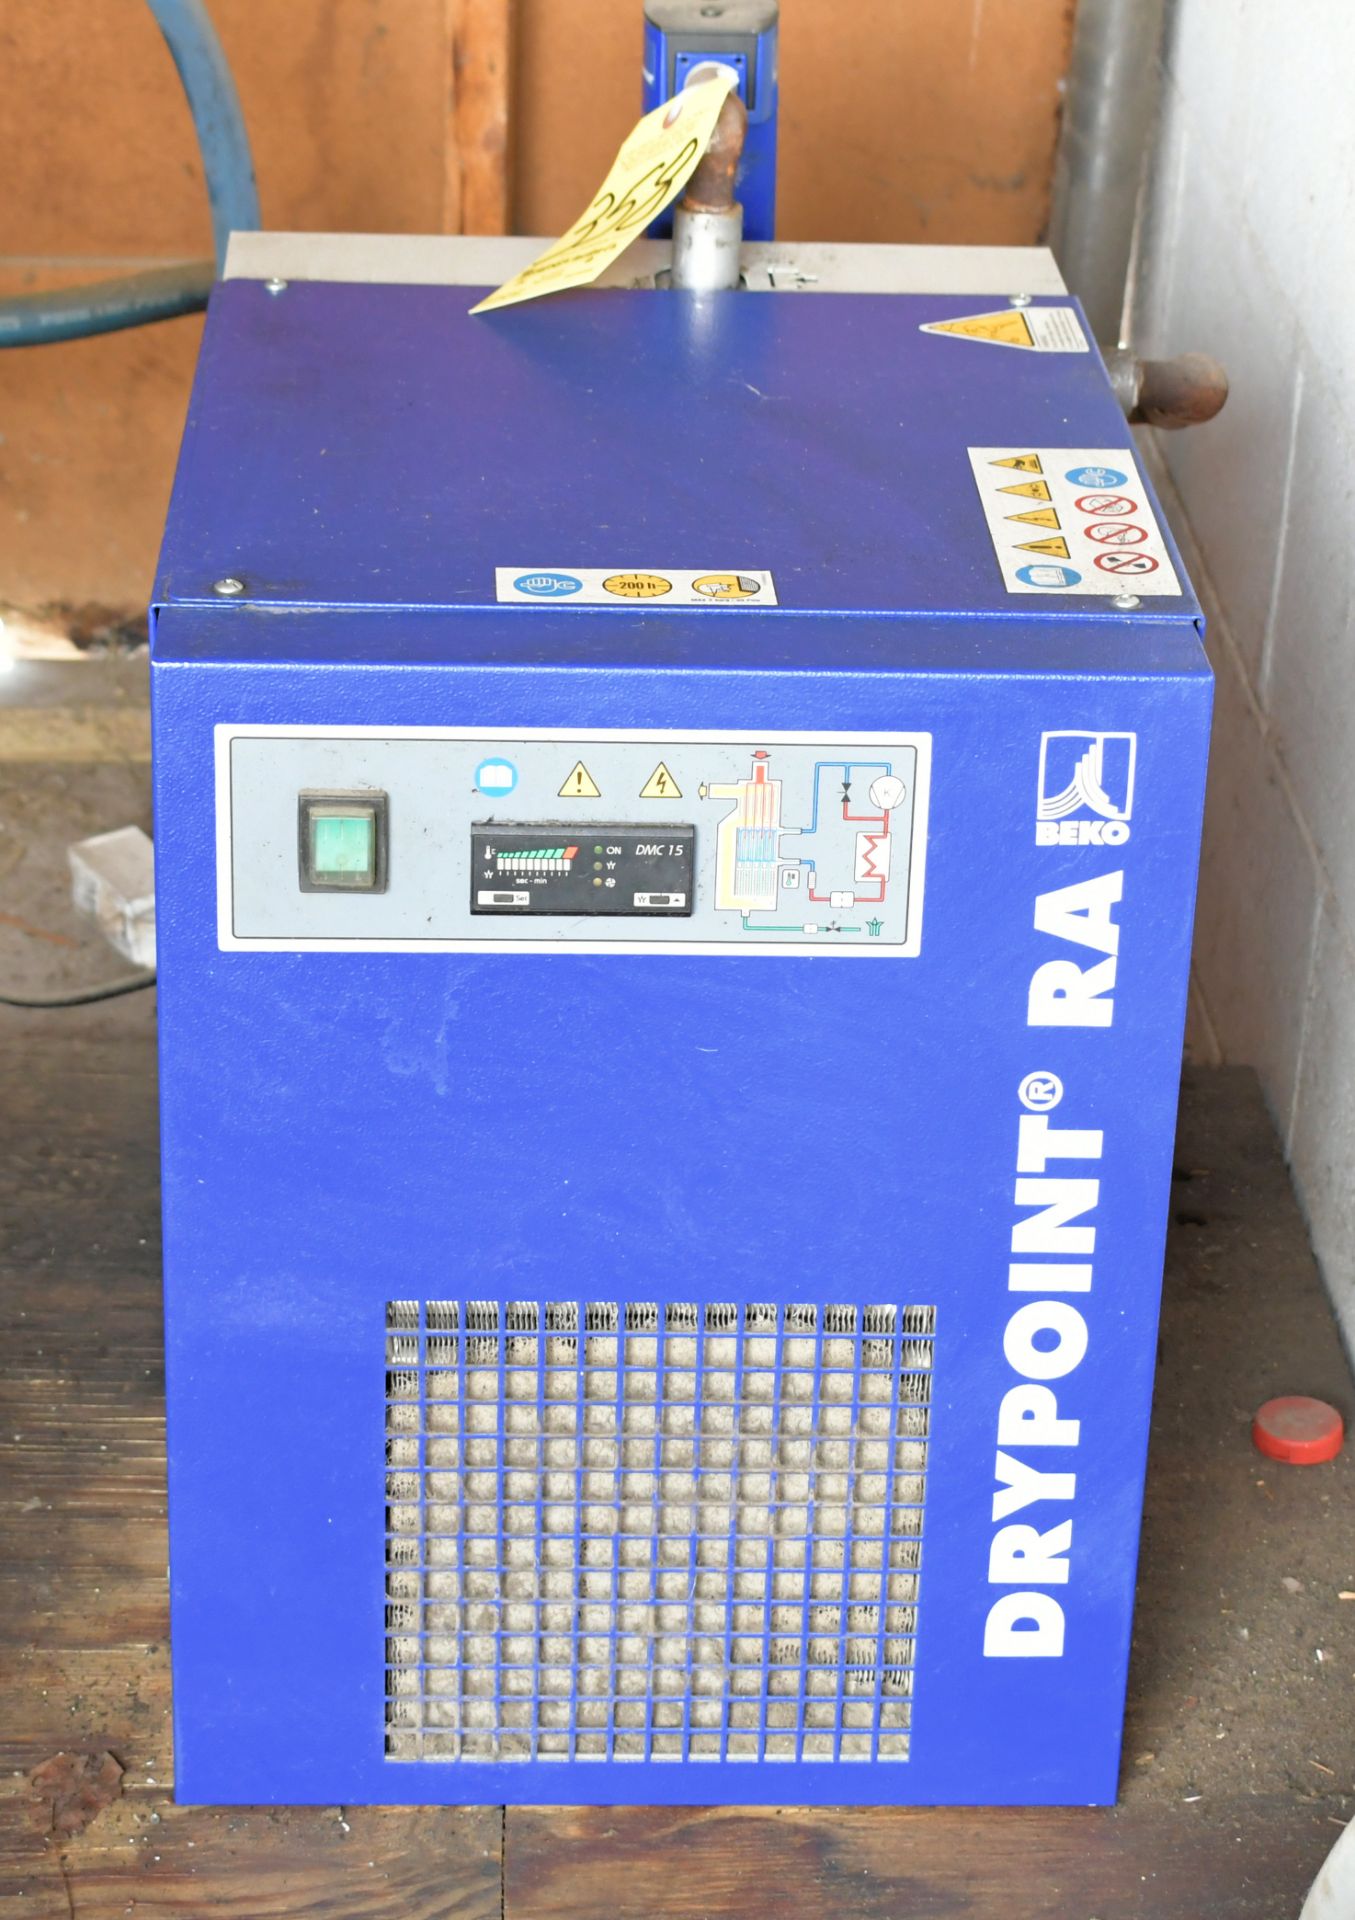 Rol-Air Model H25320S, 25-HP Horizontal Tank Mounted Air Compressor, s/n 90-8-JK, with Drypoint - Image 5 of 5